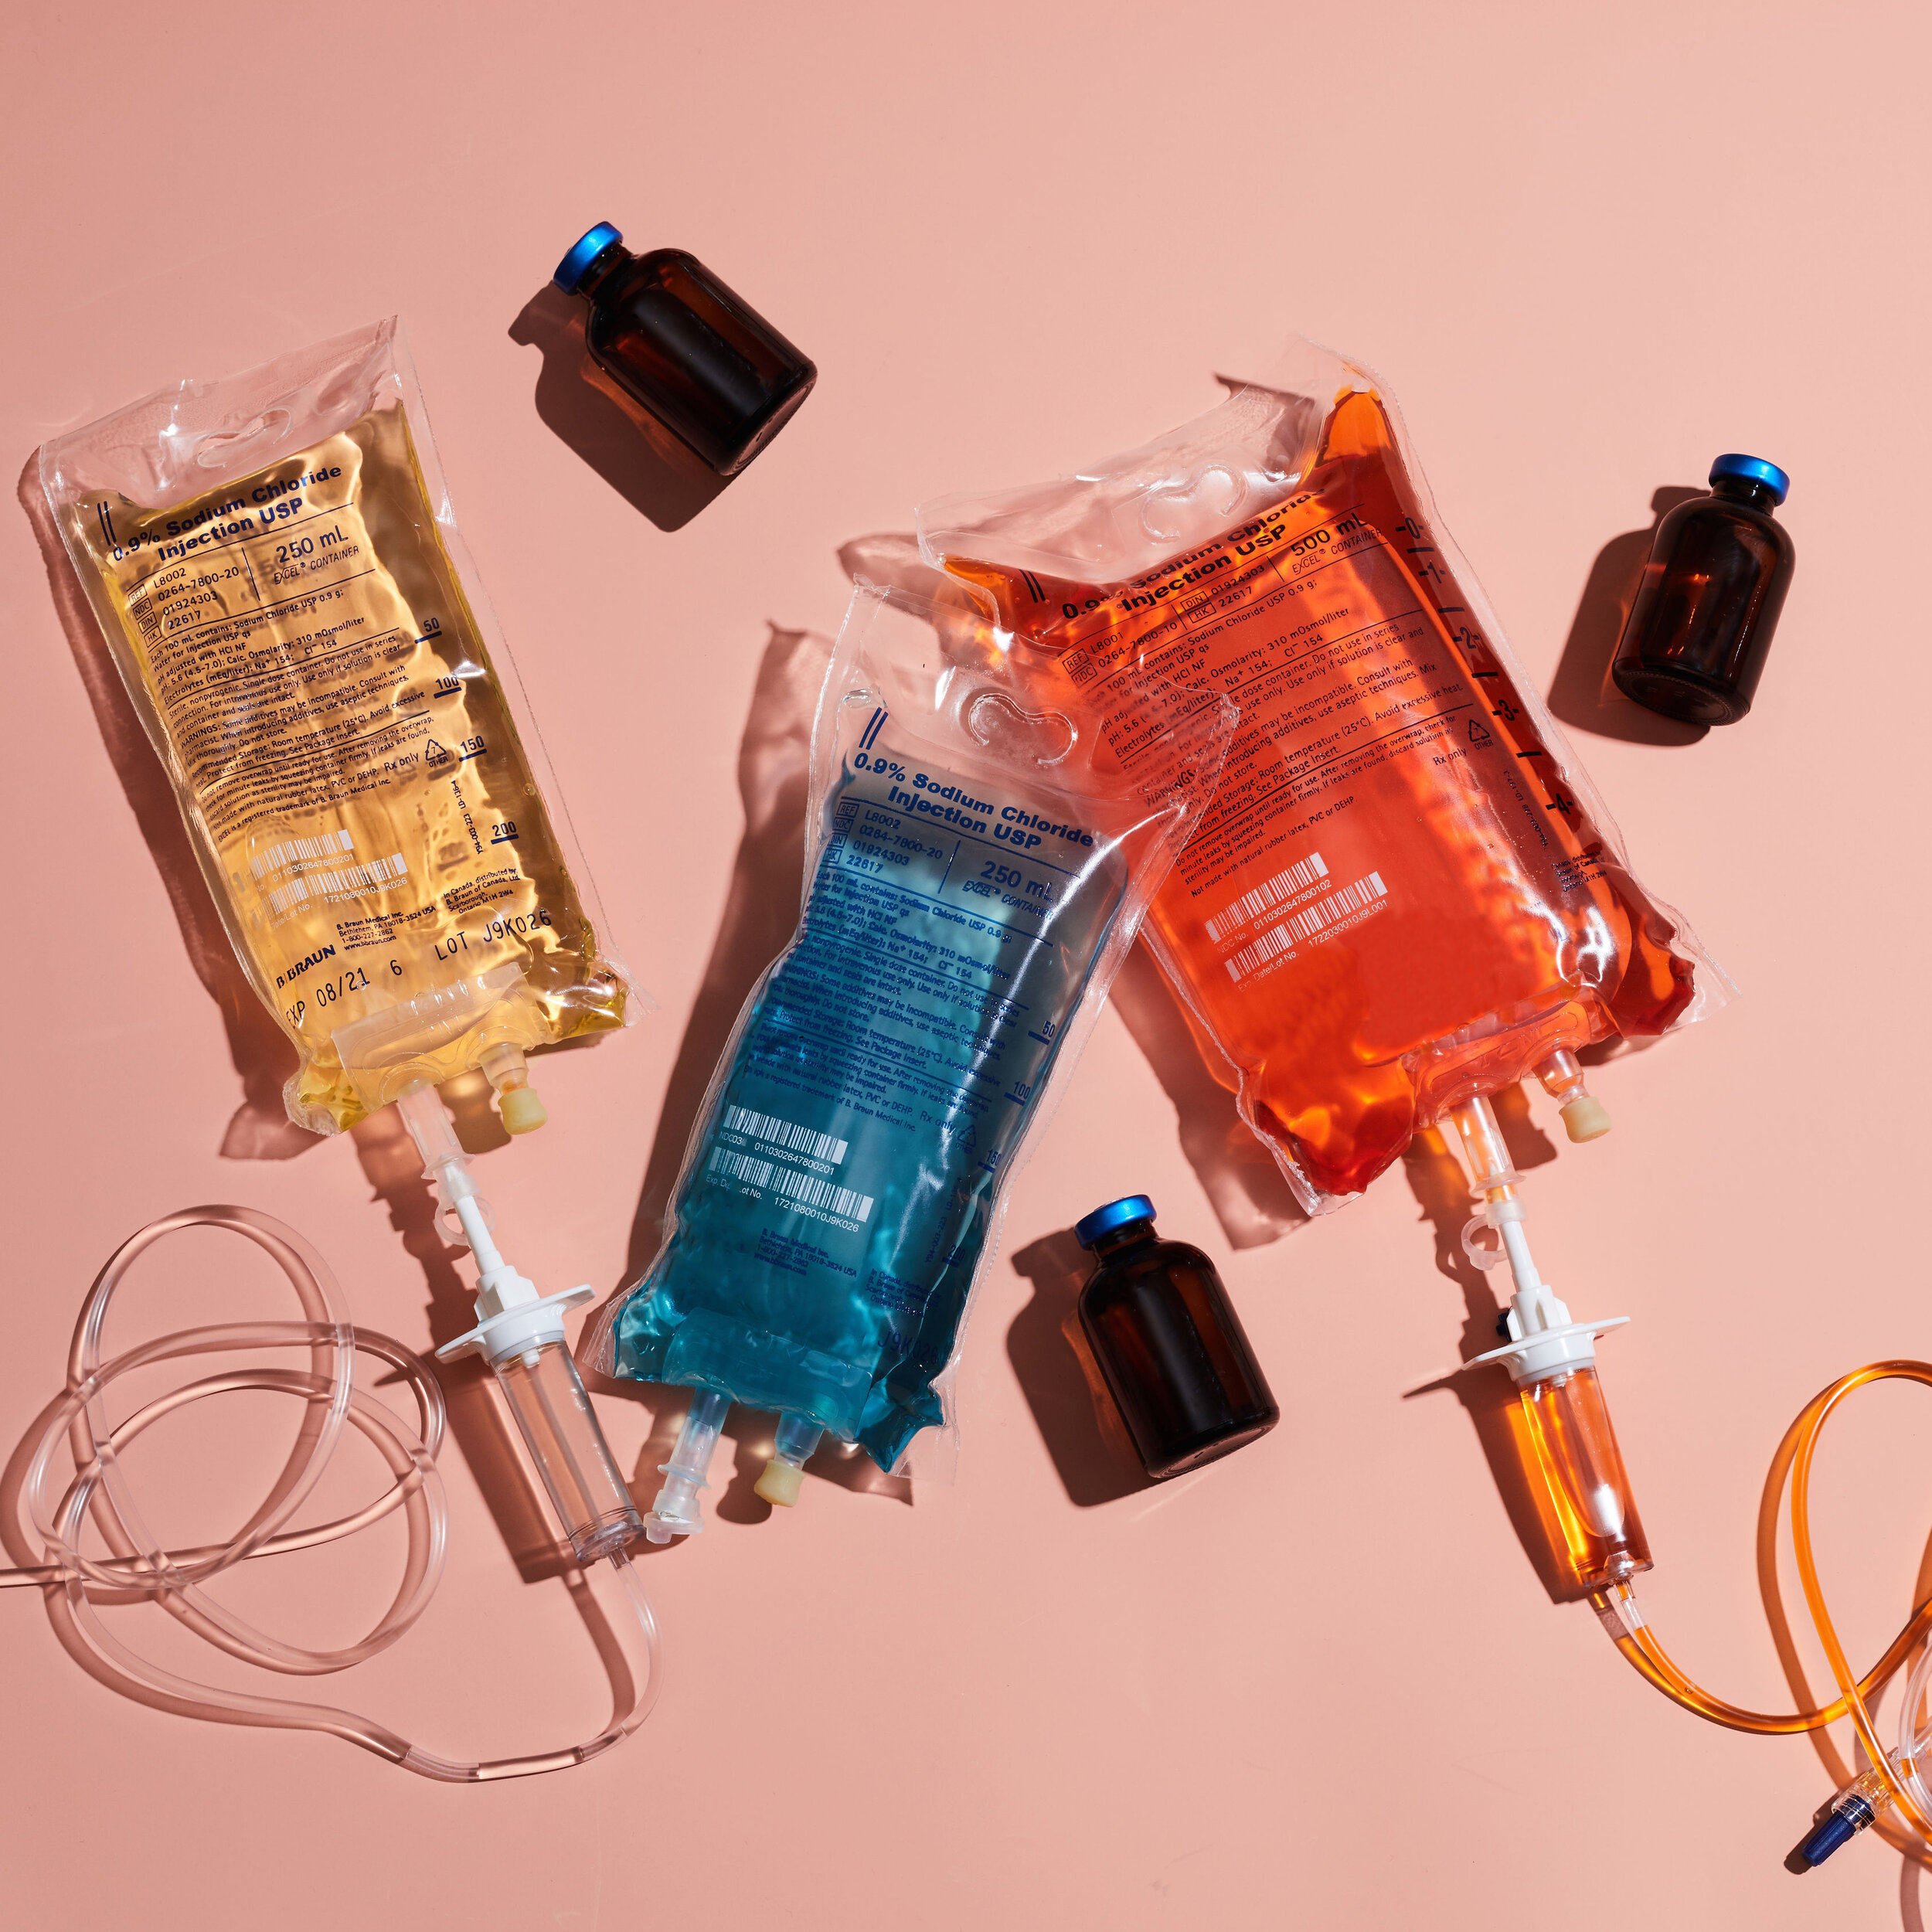 IV drips are the latest in beauty hacks, according to Kim Kardashian and Adele – other stars like Hailey Bieber, Gwyneth Paltrow and Chrissy Teigen are also fans of being hooked up for a shot of nutrients and hydration. Photo: Handout